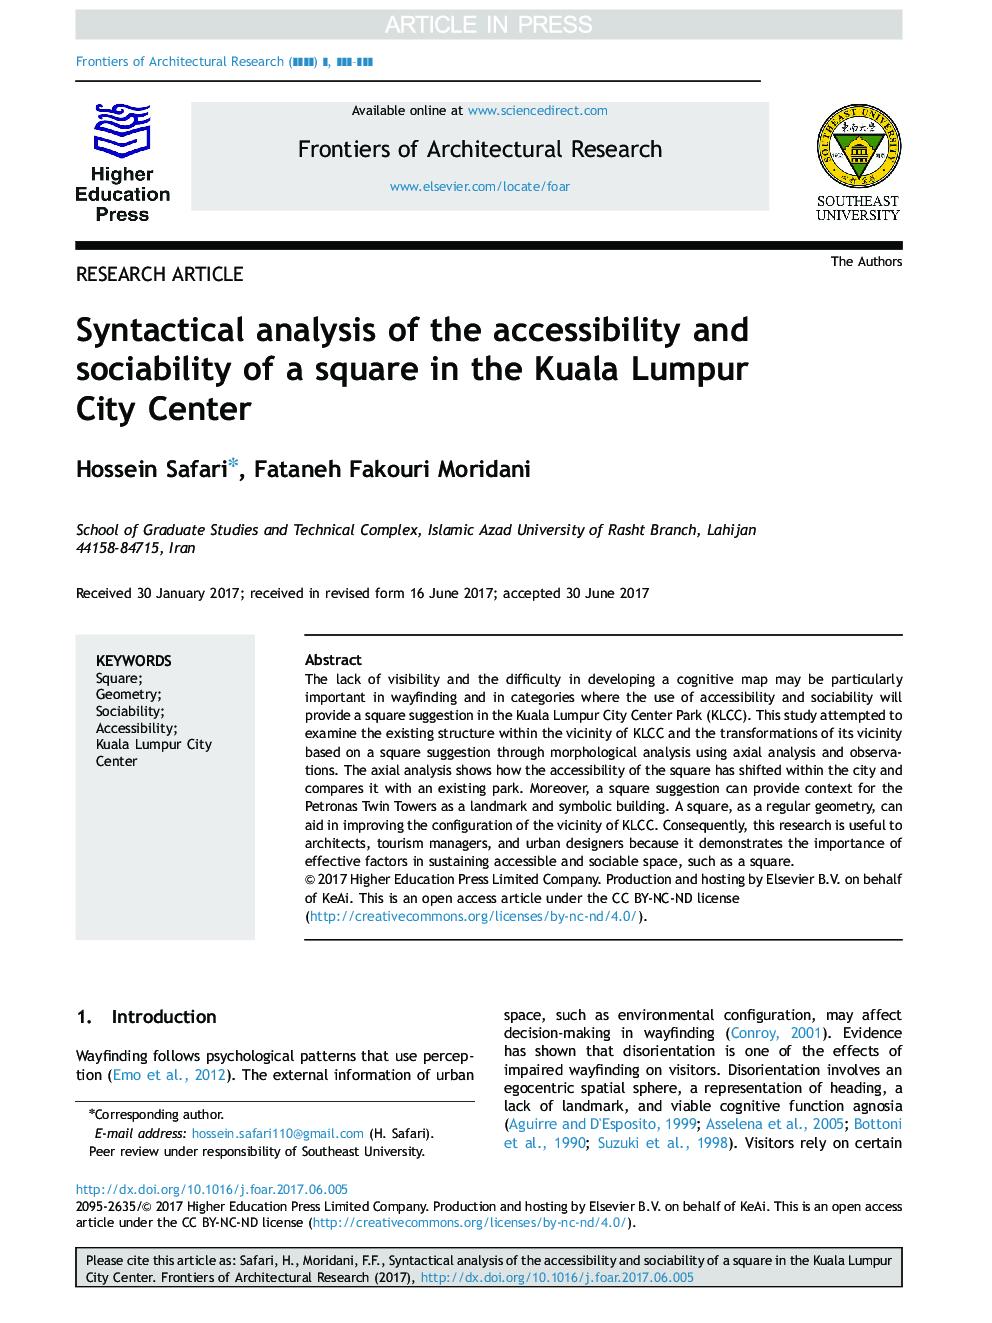 Syntactical analysis of the accessibility and sociability of a square in the Kuala Lumpur City Center